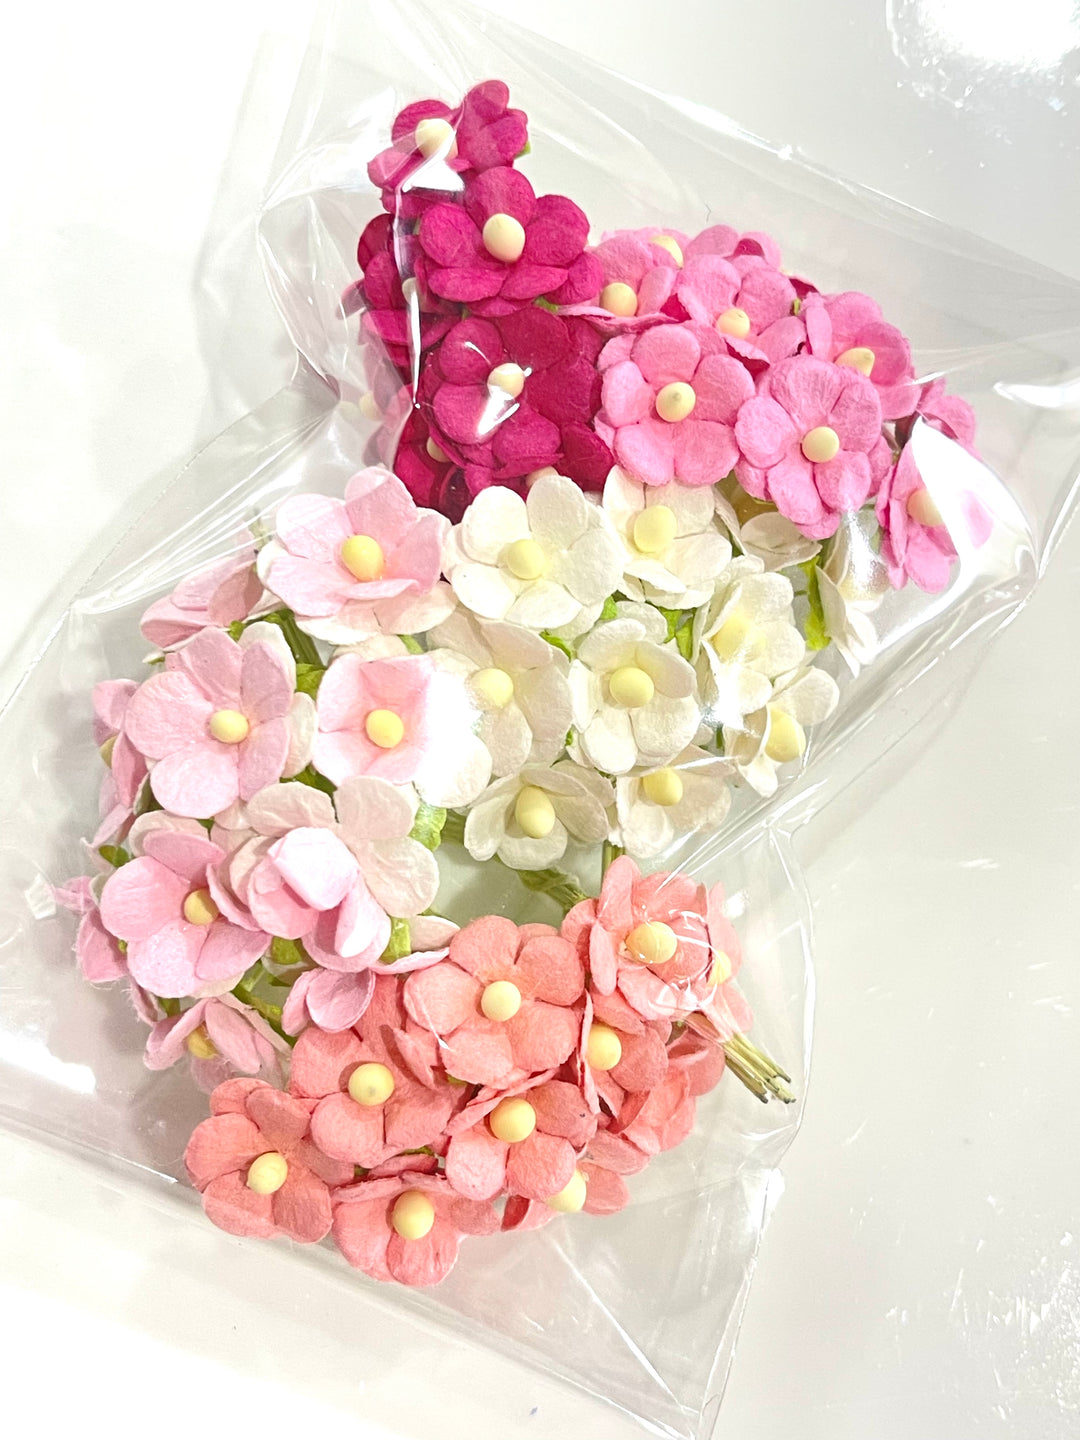 PREORDER Mixed Pinks 15mm Sweetheart Blossoms Mulberry Paper Flowers - Bulk 50 Pack